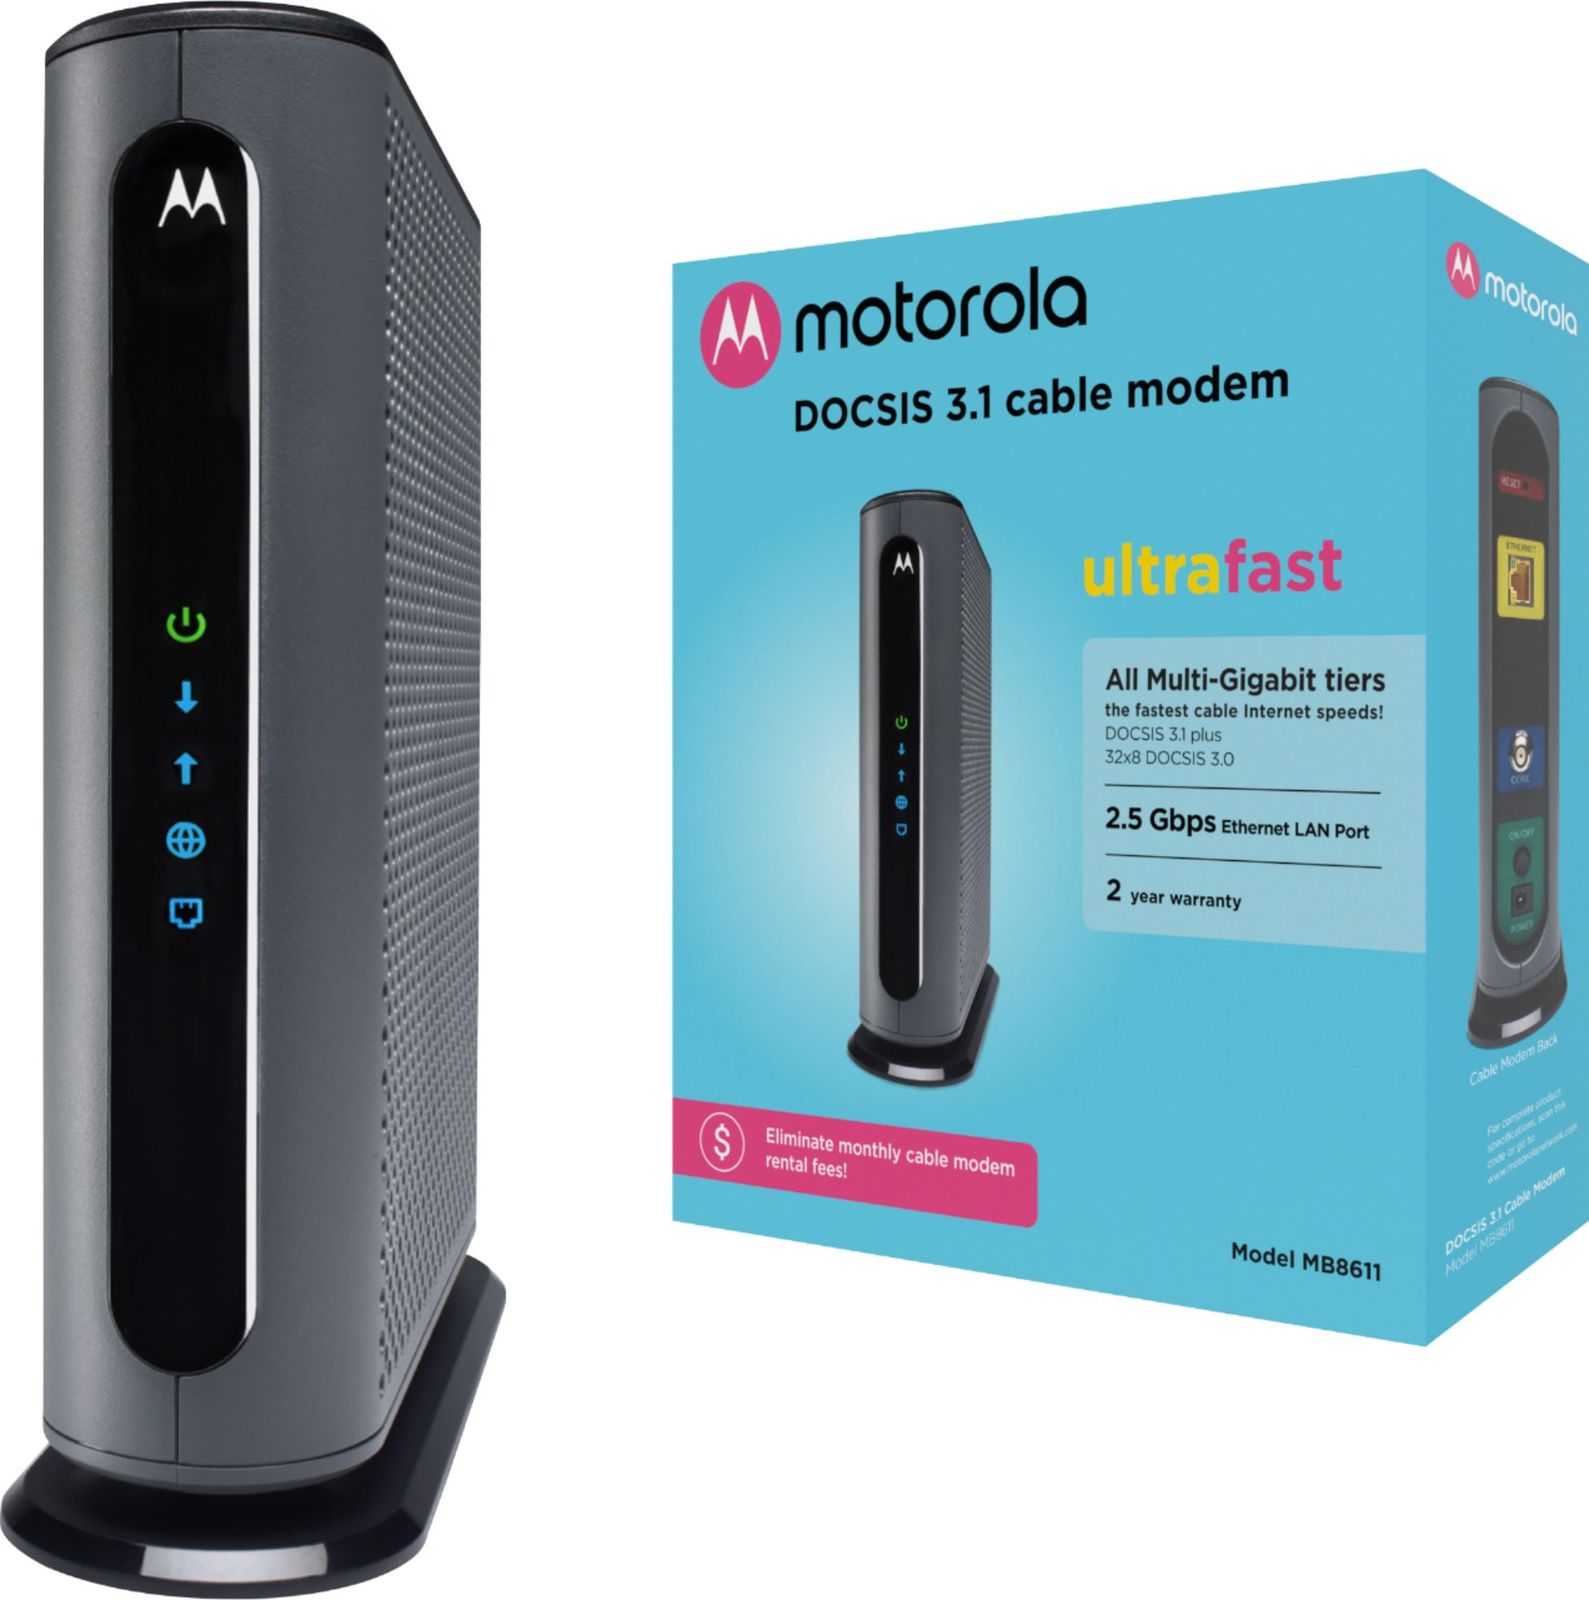 32 X 8 Docsis 3.1 Cable Modem With 2.5 Gb Ethernet